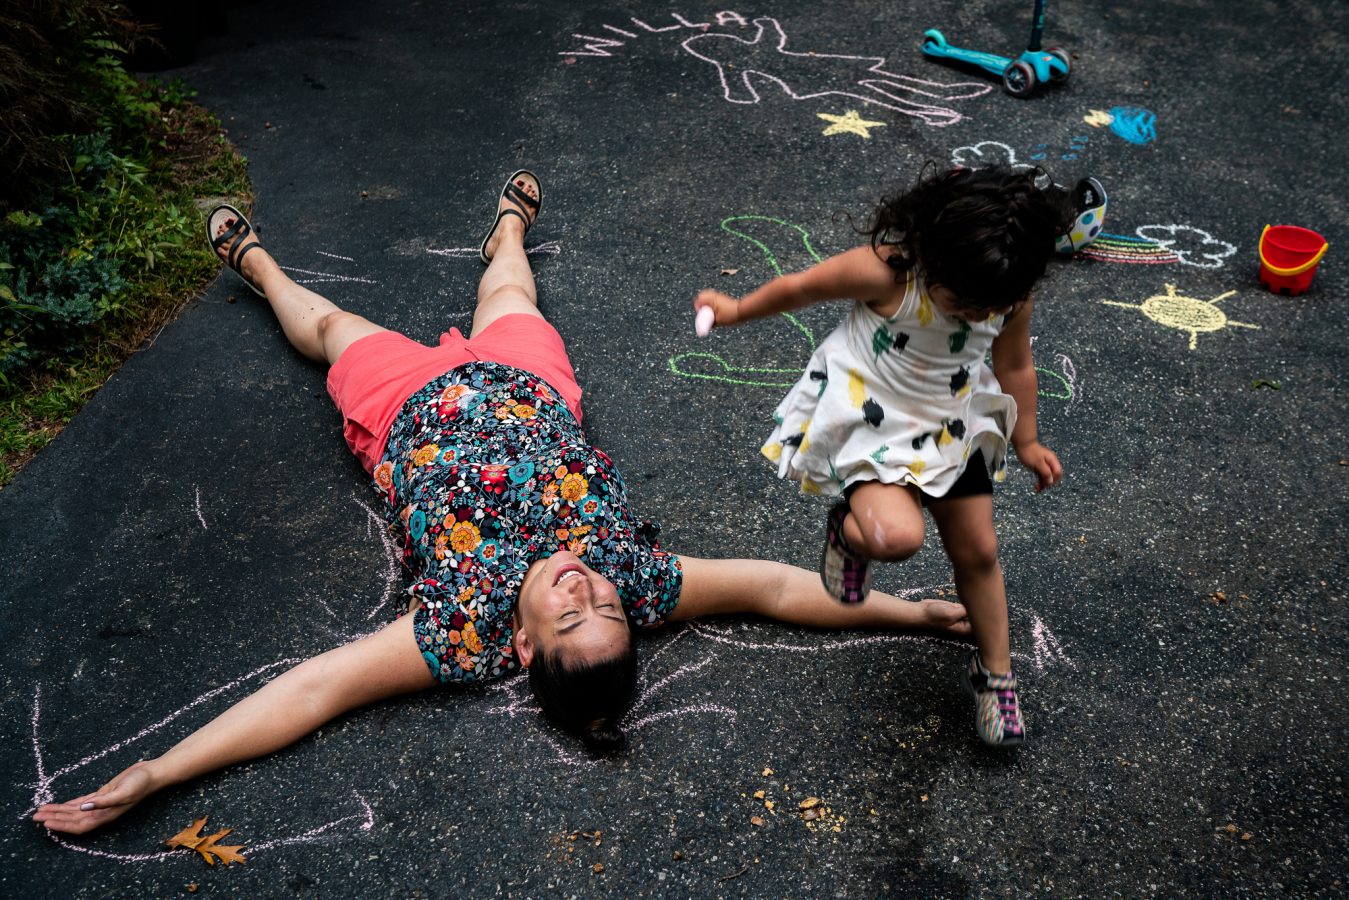 mom lying on driveway with sidewalk chalk drawings as young girl jumps over her arm